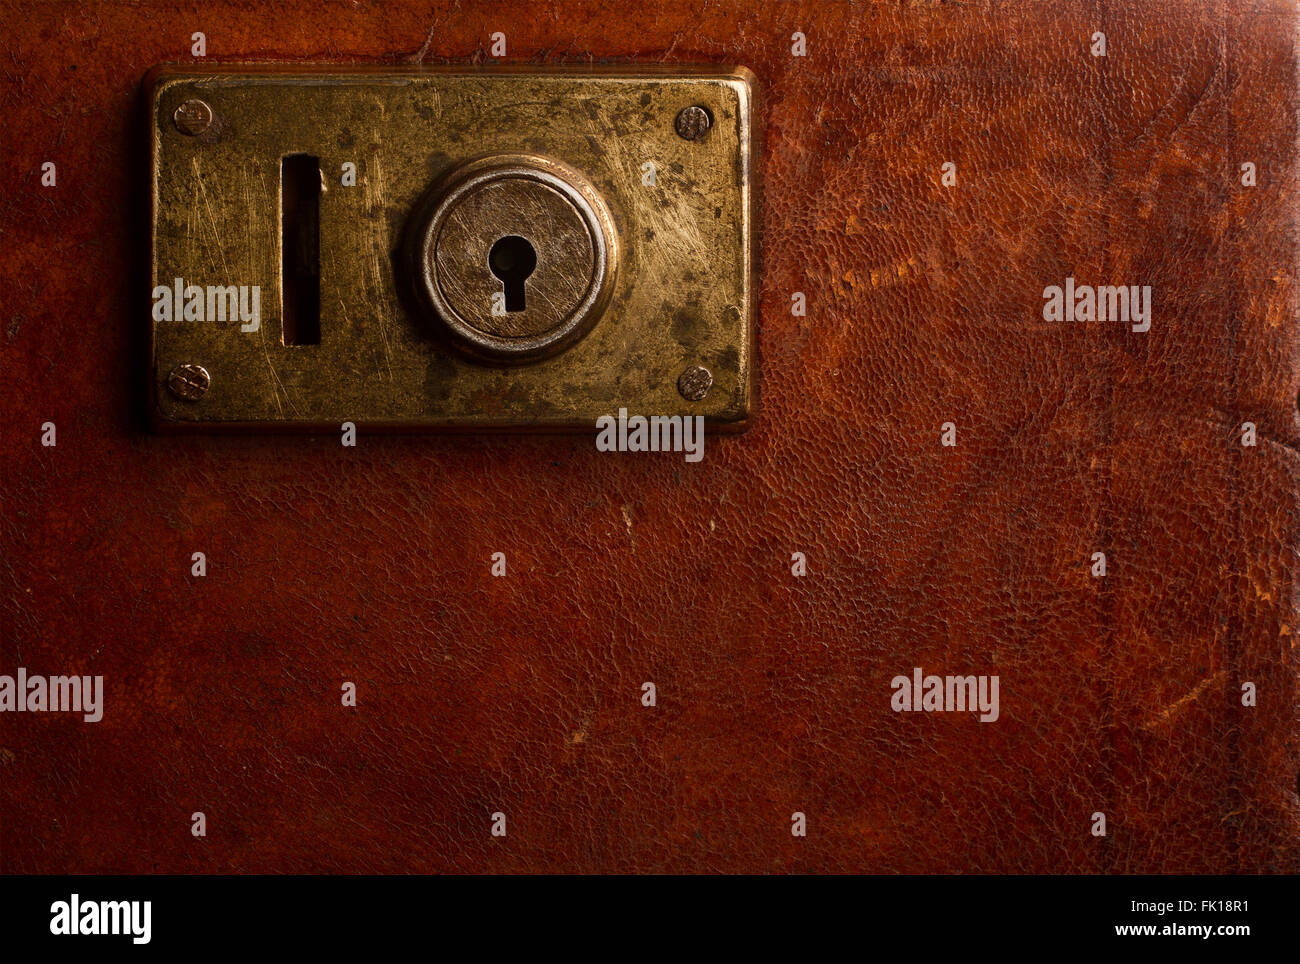 Horizontal close up of an old locking mechanism on a vintage suitcase made of brown leather Stock Photo